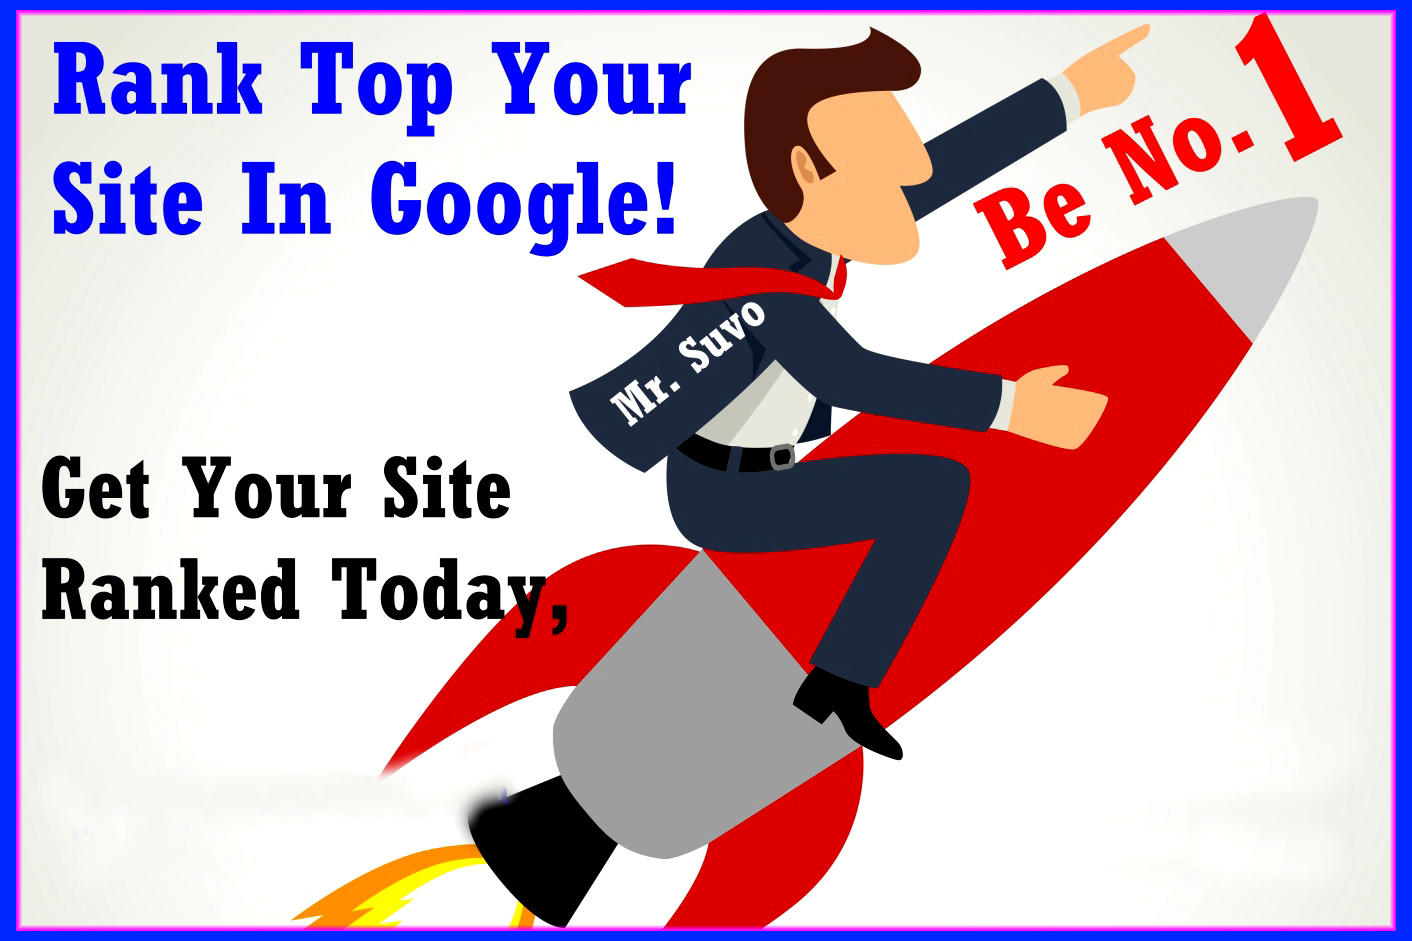 BOOSTED 2021 SPECIAL-NEW BULLET PROOF POWER SEO STRATEGY PACK HV3 EXTREME GOOGLE 1ST